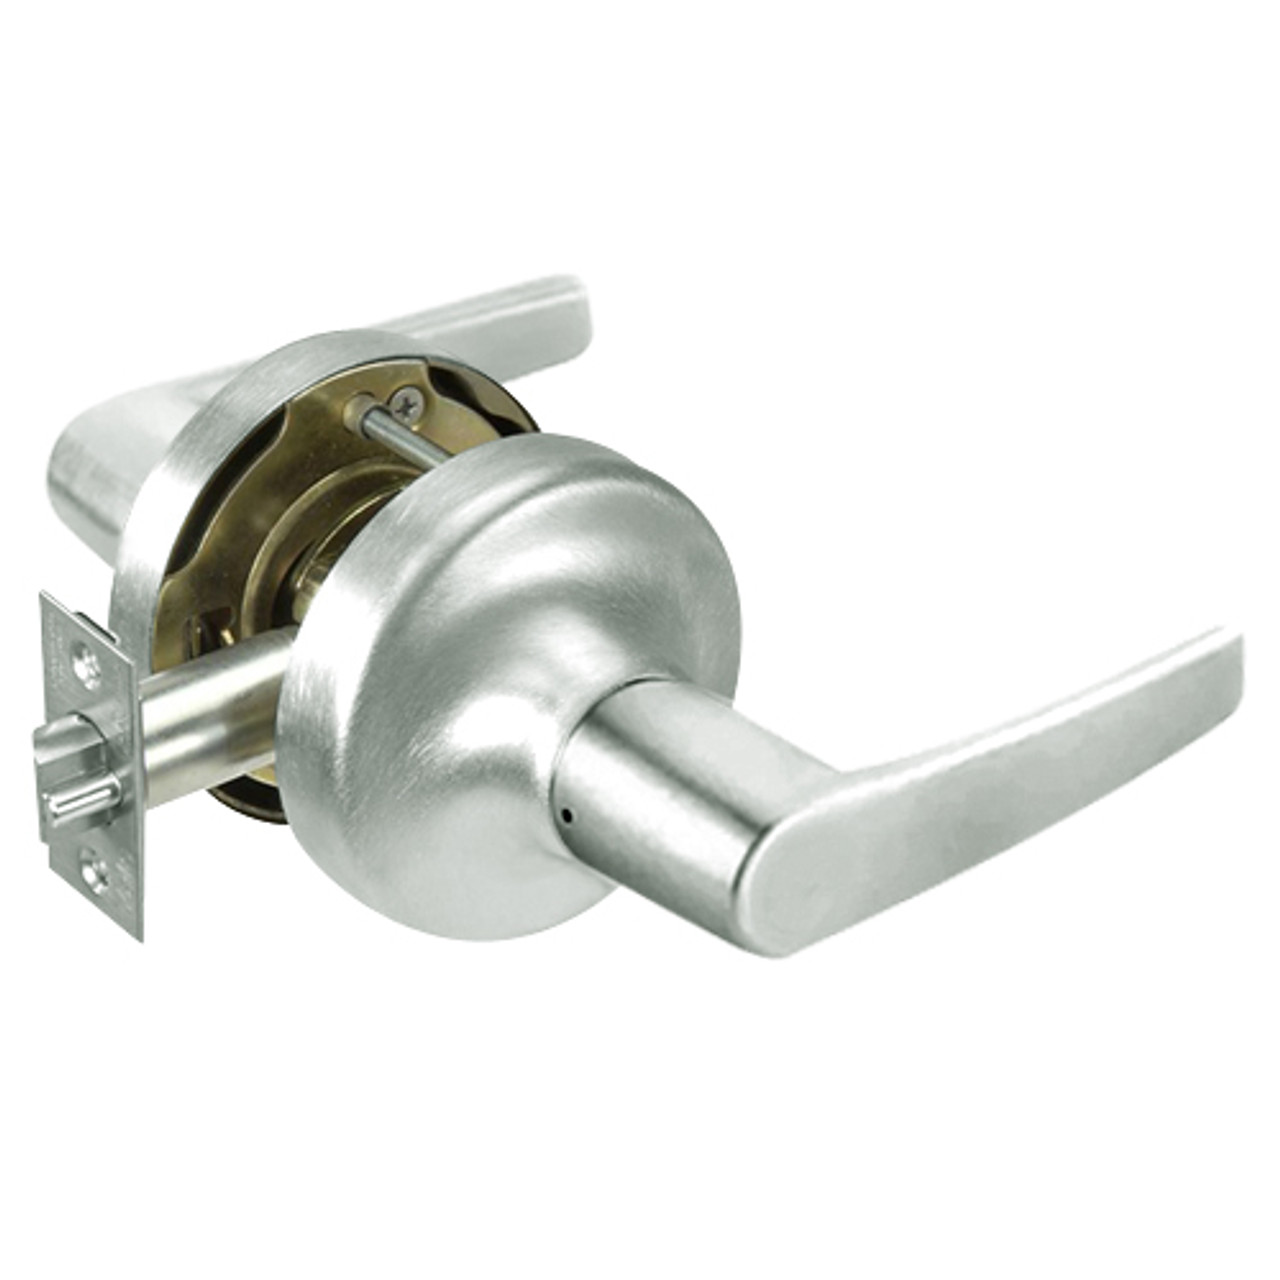 MO5301LN-619 Yale 5300LN Series Non-Keyed Passage or Closet Latchset Cylindrical Locks with Monroe Lever in Satin Nickel